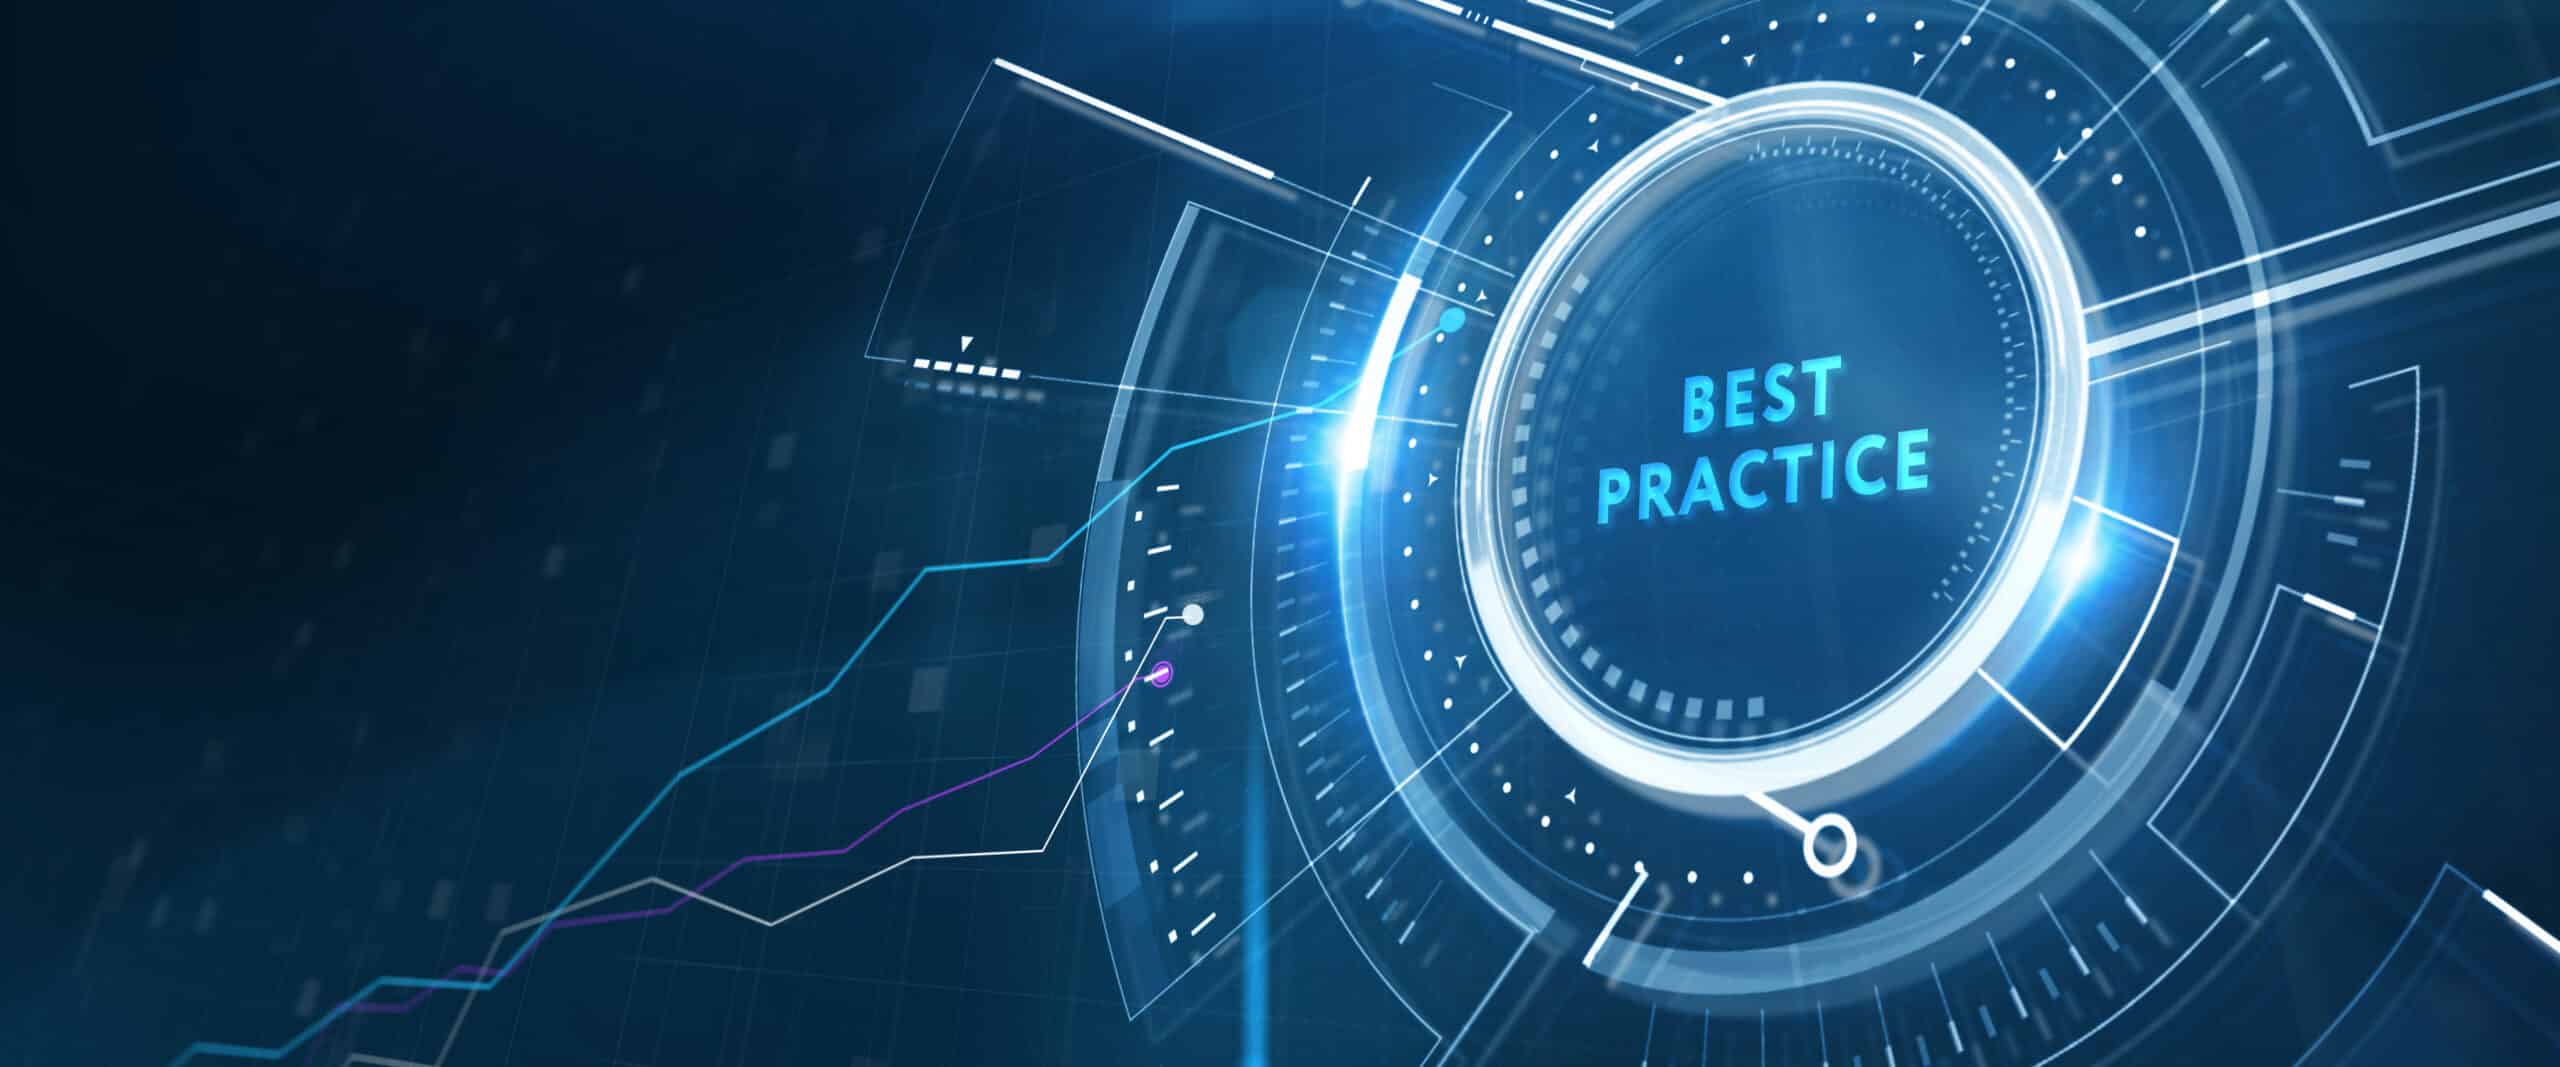 A VR image of the words “best practices” referring to best practices for Salesforce ALM.